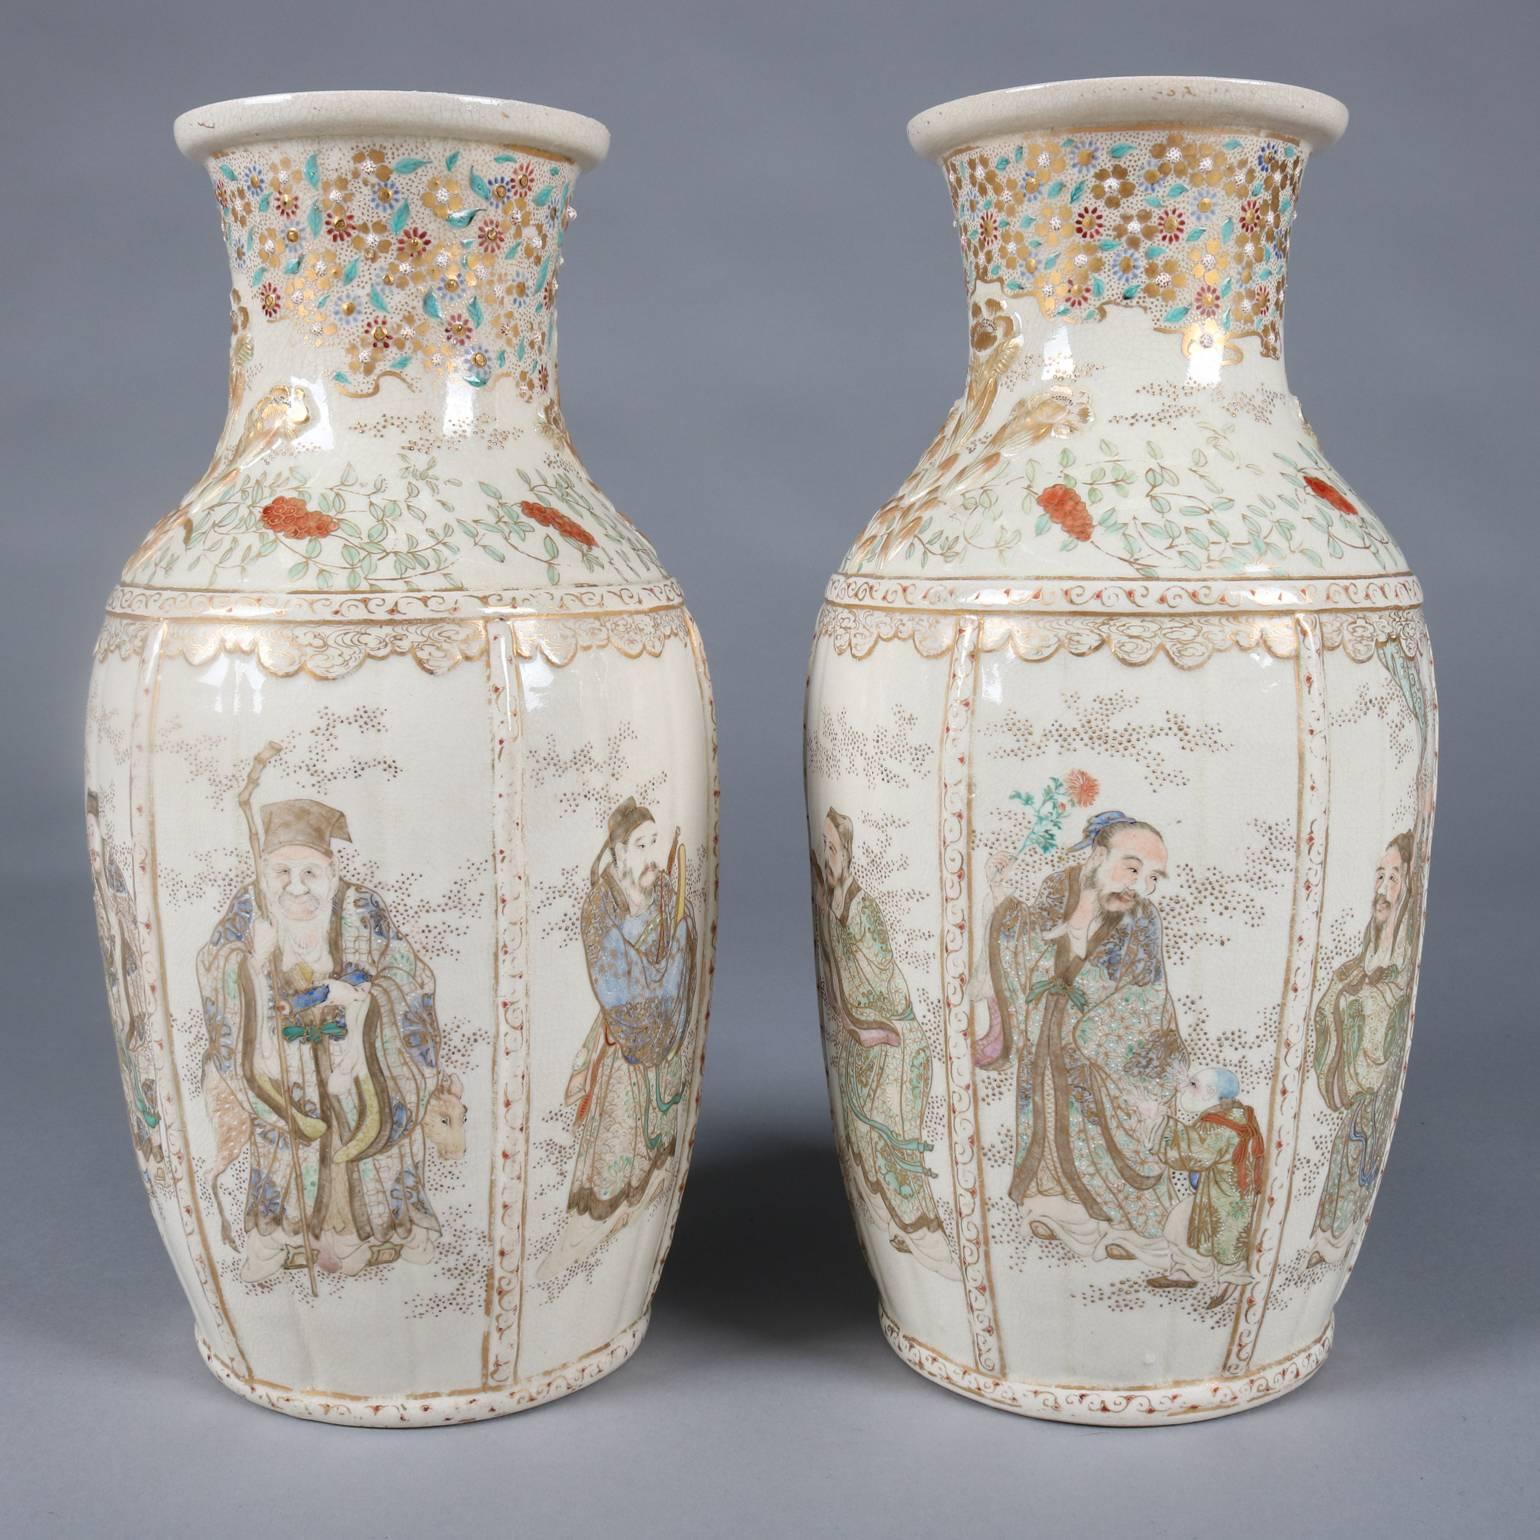 19th Century Pair of Antique and Fine Japanese Gilt Satsuma Meiji Pottery Vases, Wise Men